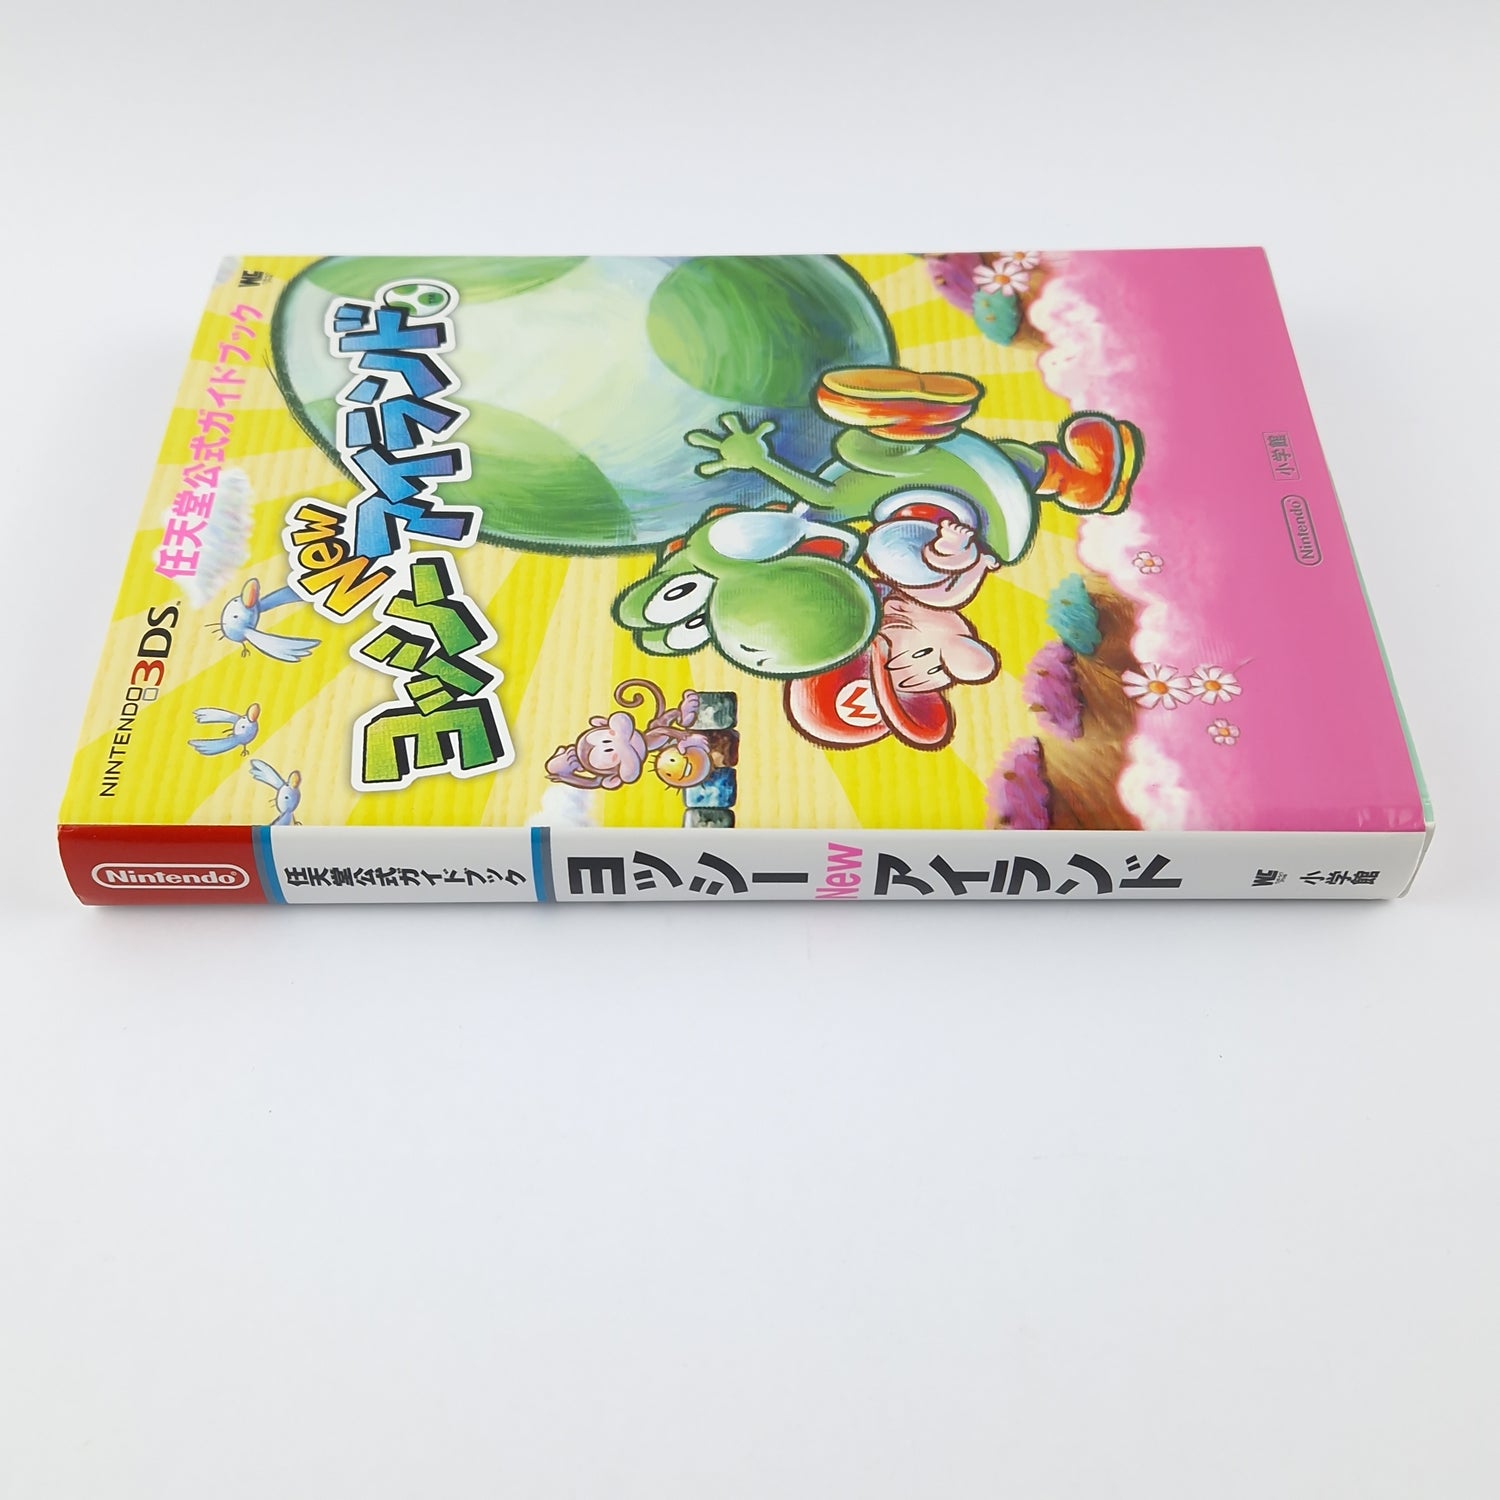 Nintendo 3DS Spiel : Yoshis New island + JAPAN Guide - OVP Anleitung